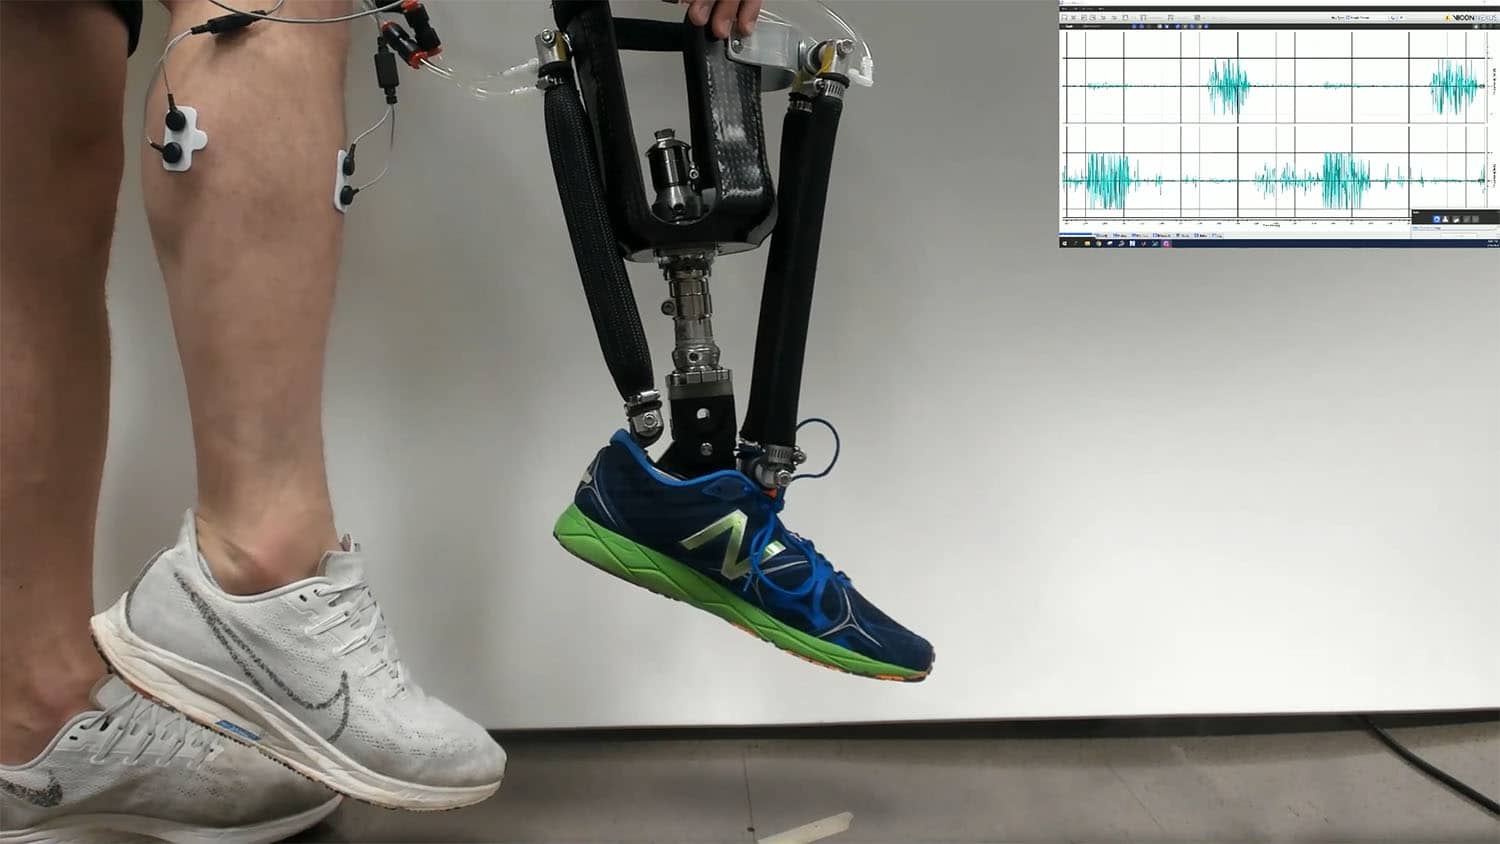 Robotic Prosthetic Ankles Improve ‘Natural’ Movement, Stability